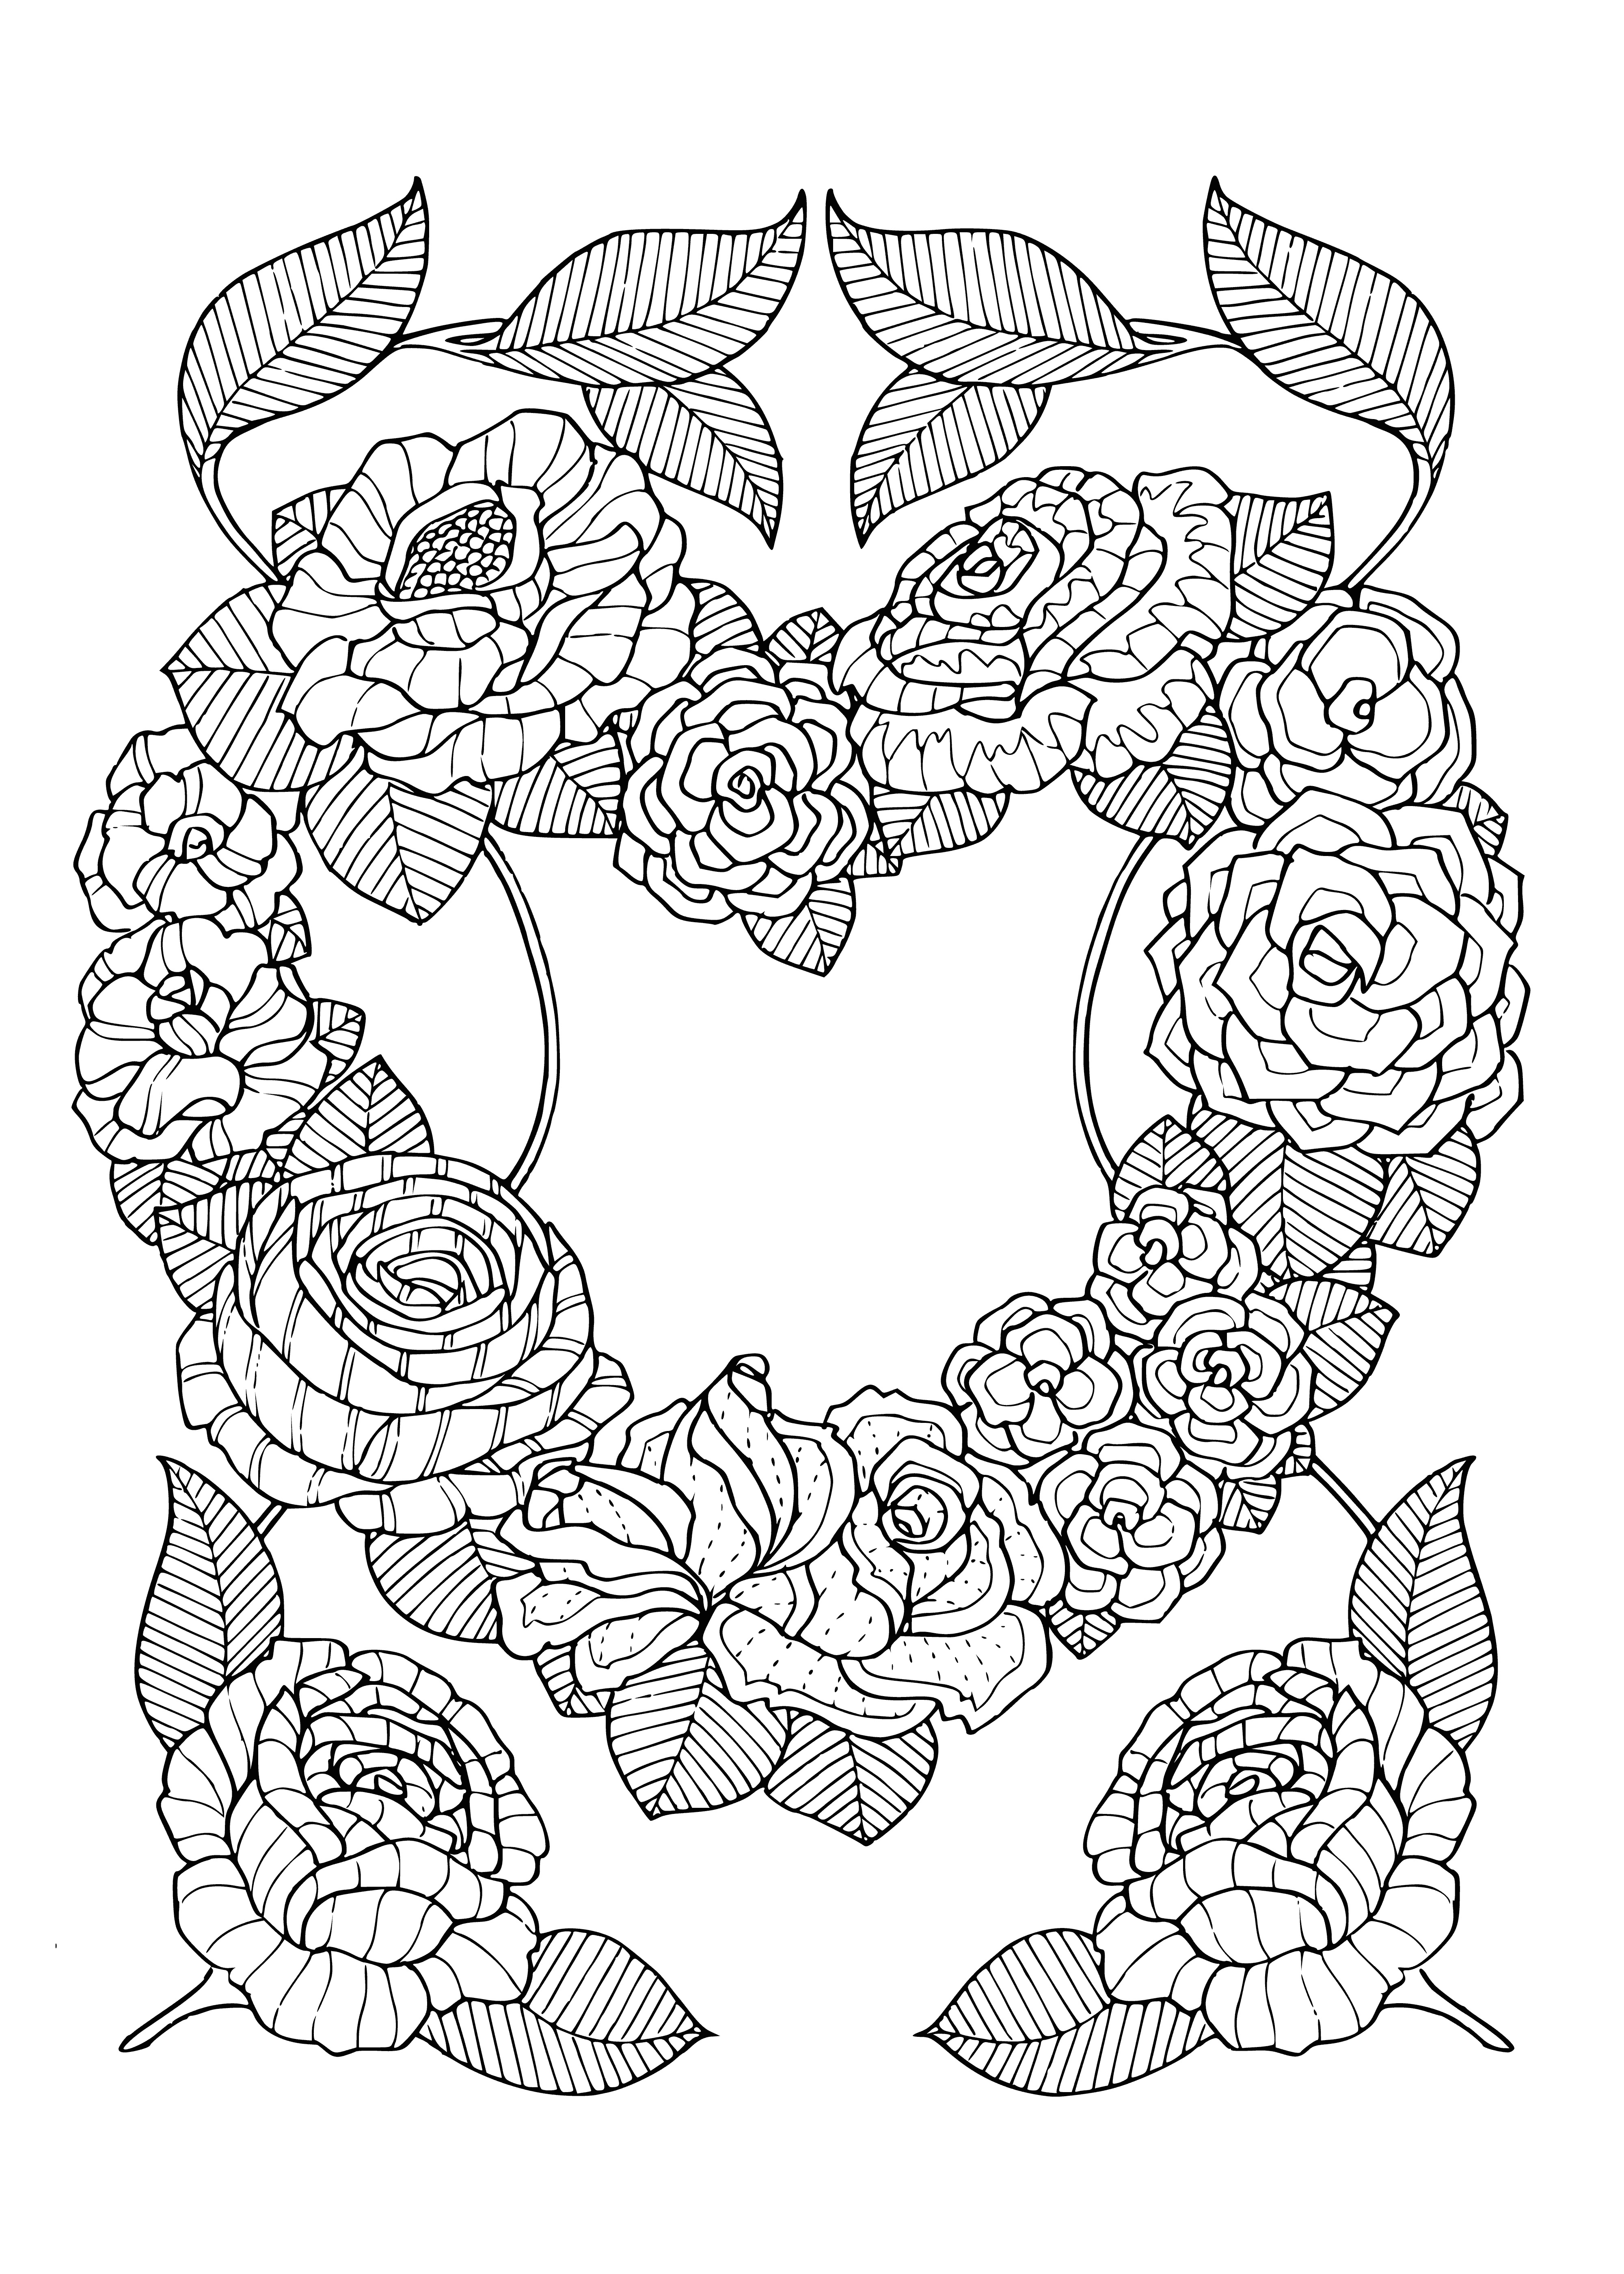 coloring page: A variety of colorful flowers and their unique petals and stems, against a beautiful background of blues, greens, and purples.